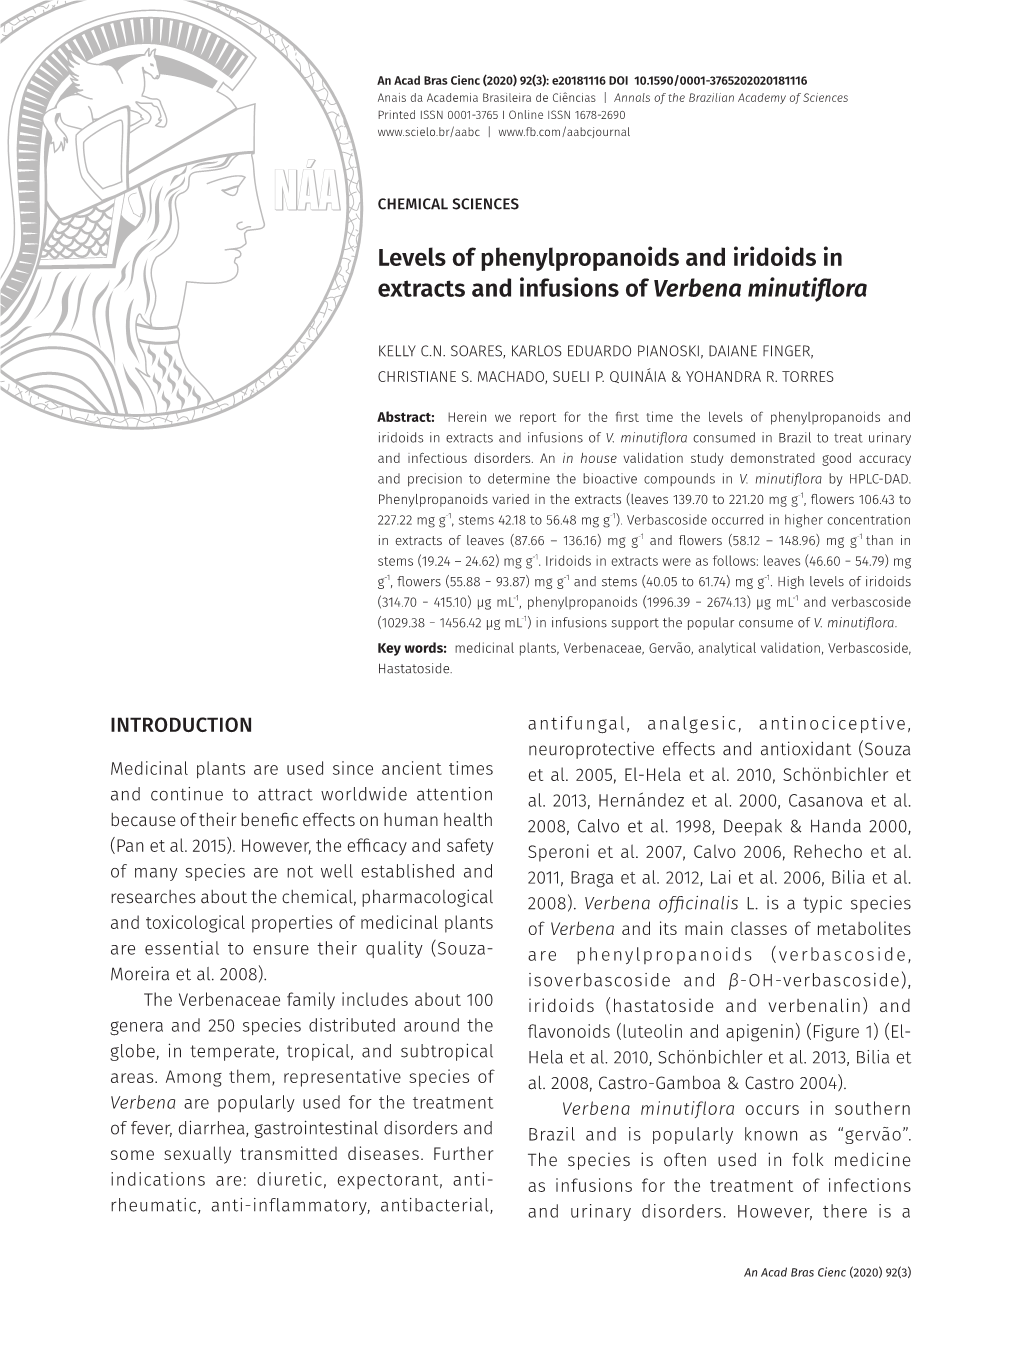 Levels of Phenylpropanoids and Iridoids in Extracts and Infusions of Verbena Minutiflora